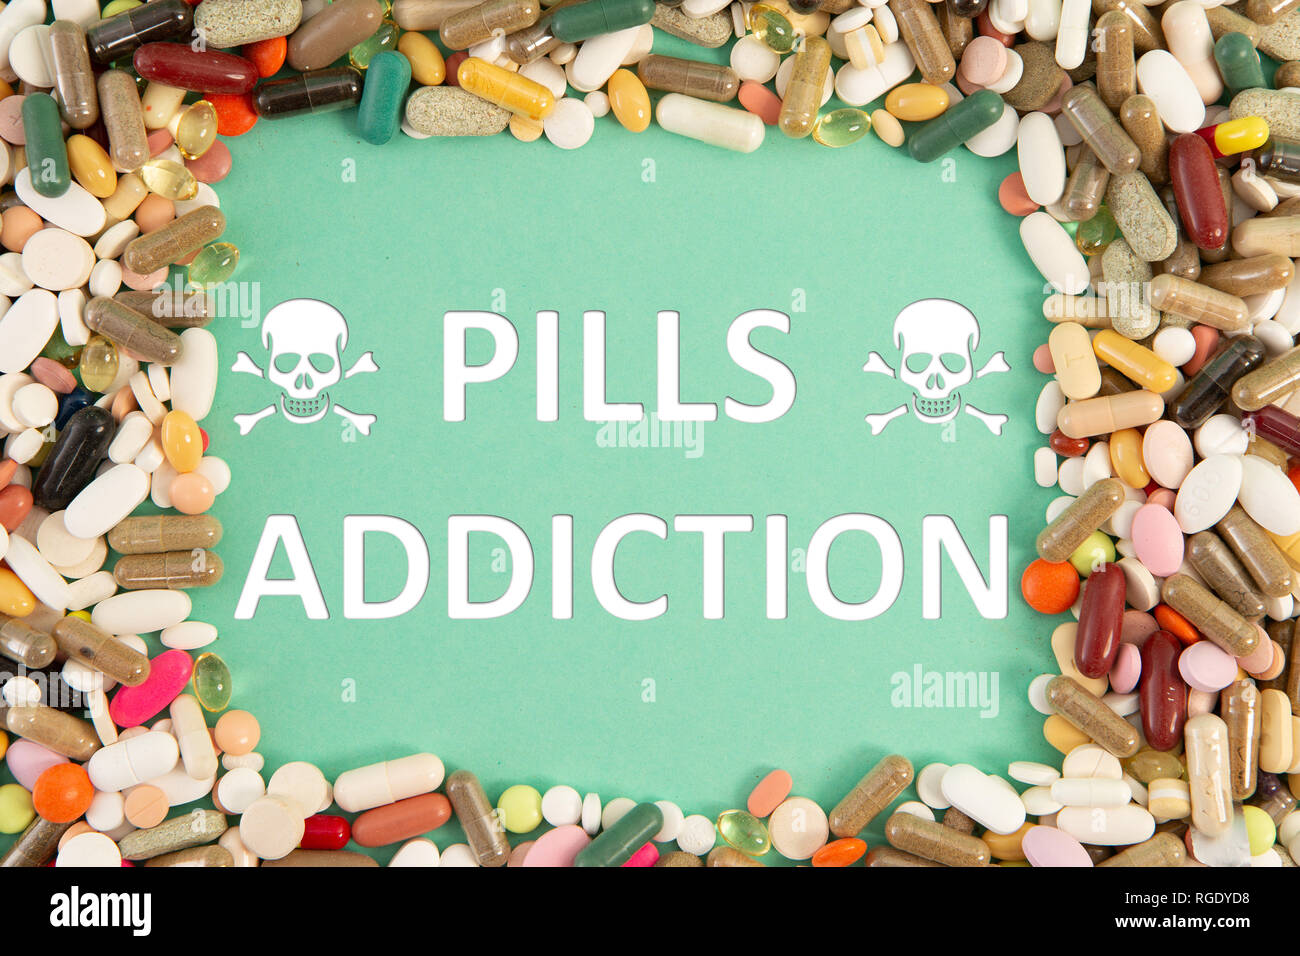 Pills addiction text and health hazard skulls symbol with colourful medicine frame on blue background Stock Photo